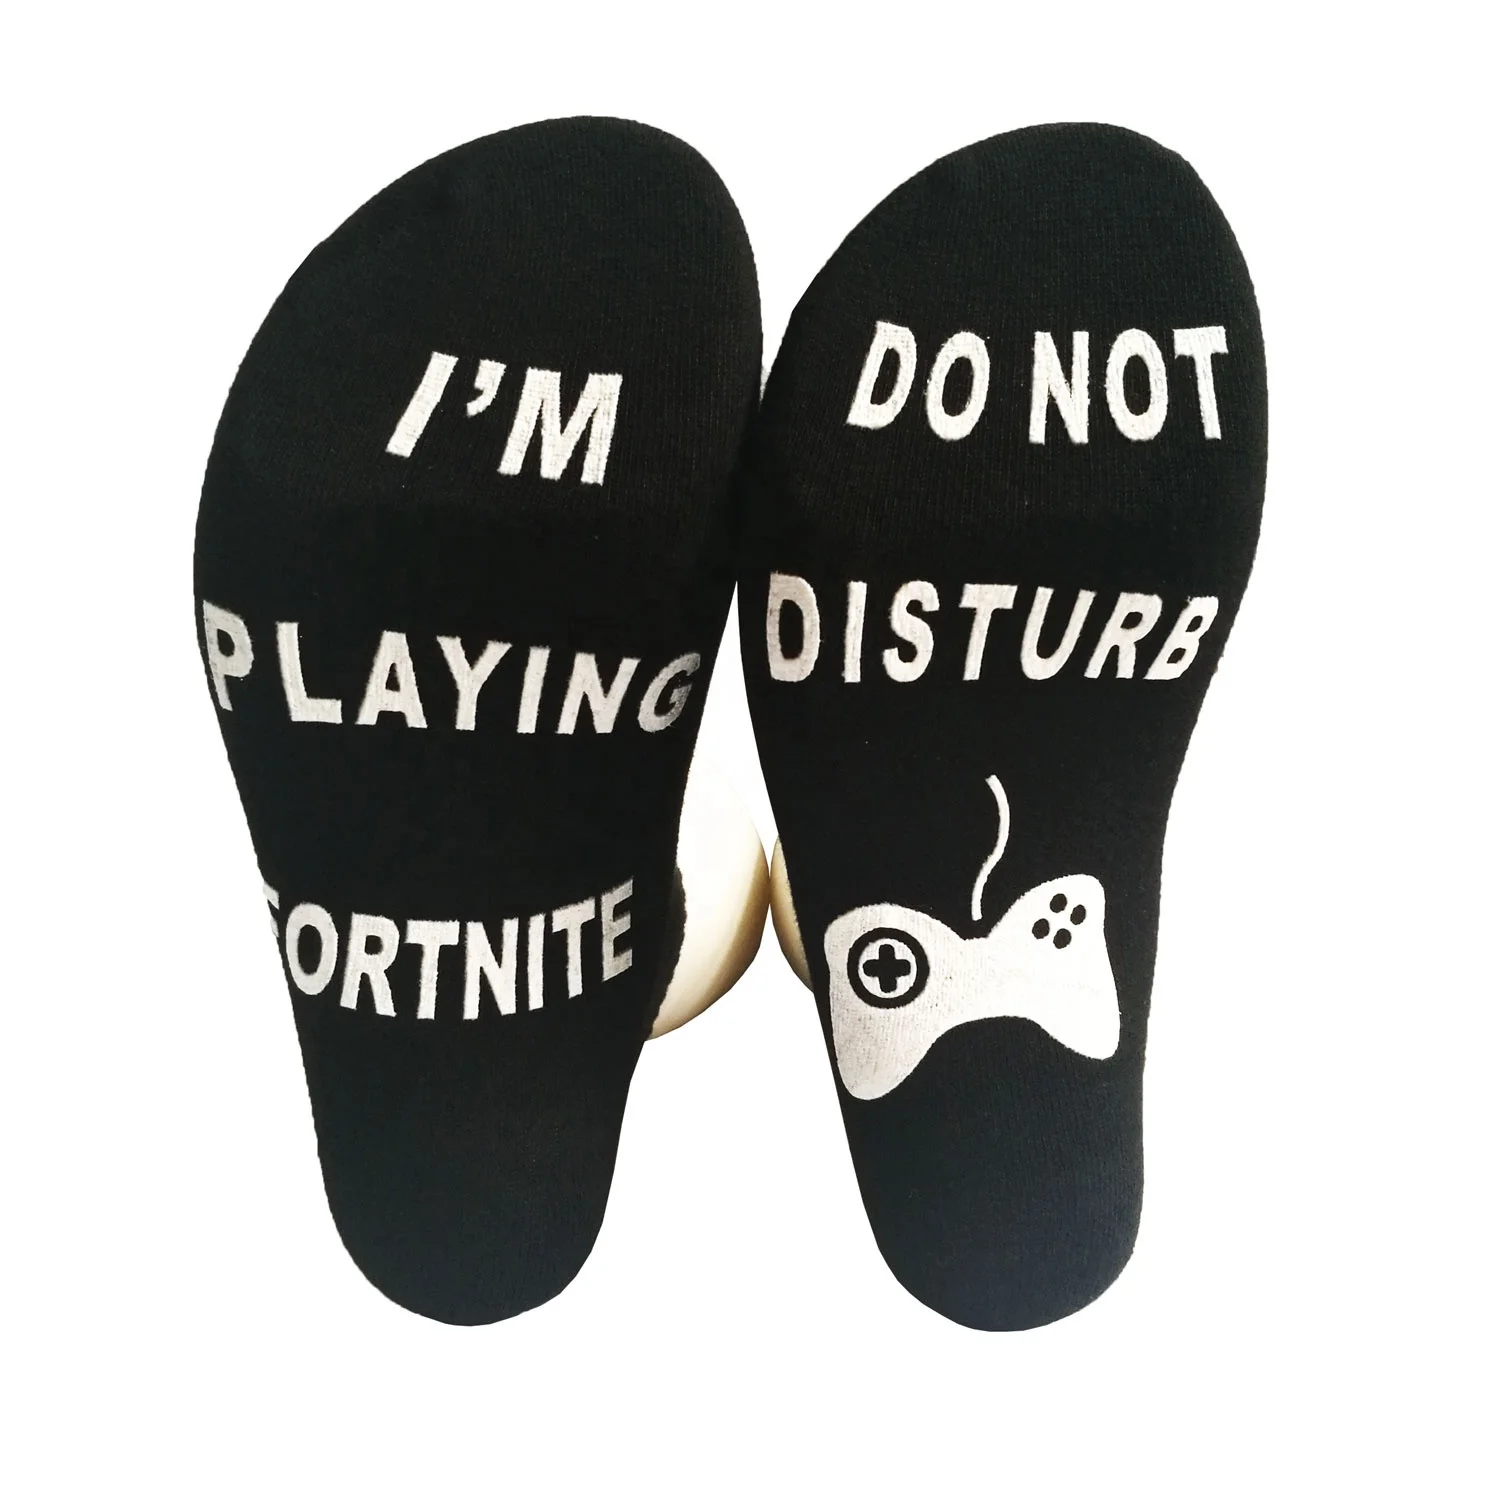 

Fashion Unisex Non-slip Cotton socks - DO NOT DISTURB! I'M PLAYING Funy Letter Printed Crew Ankle socks